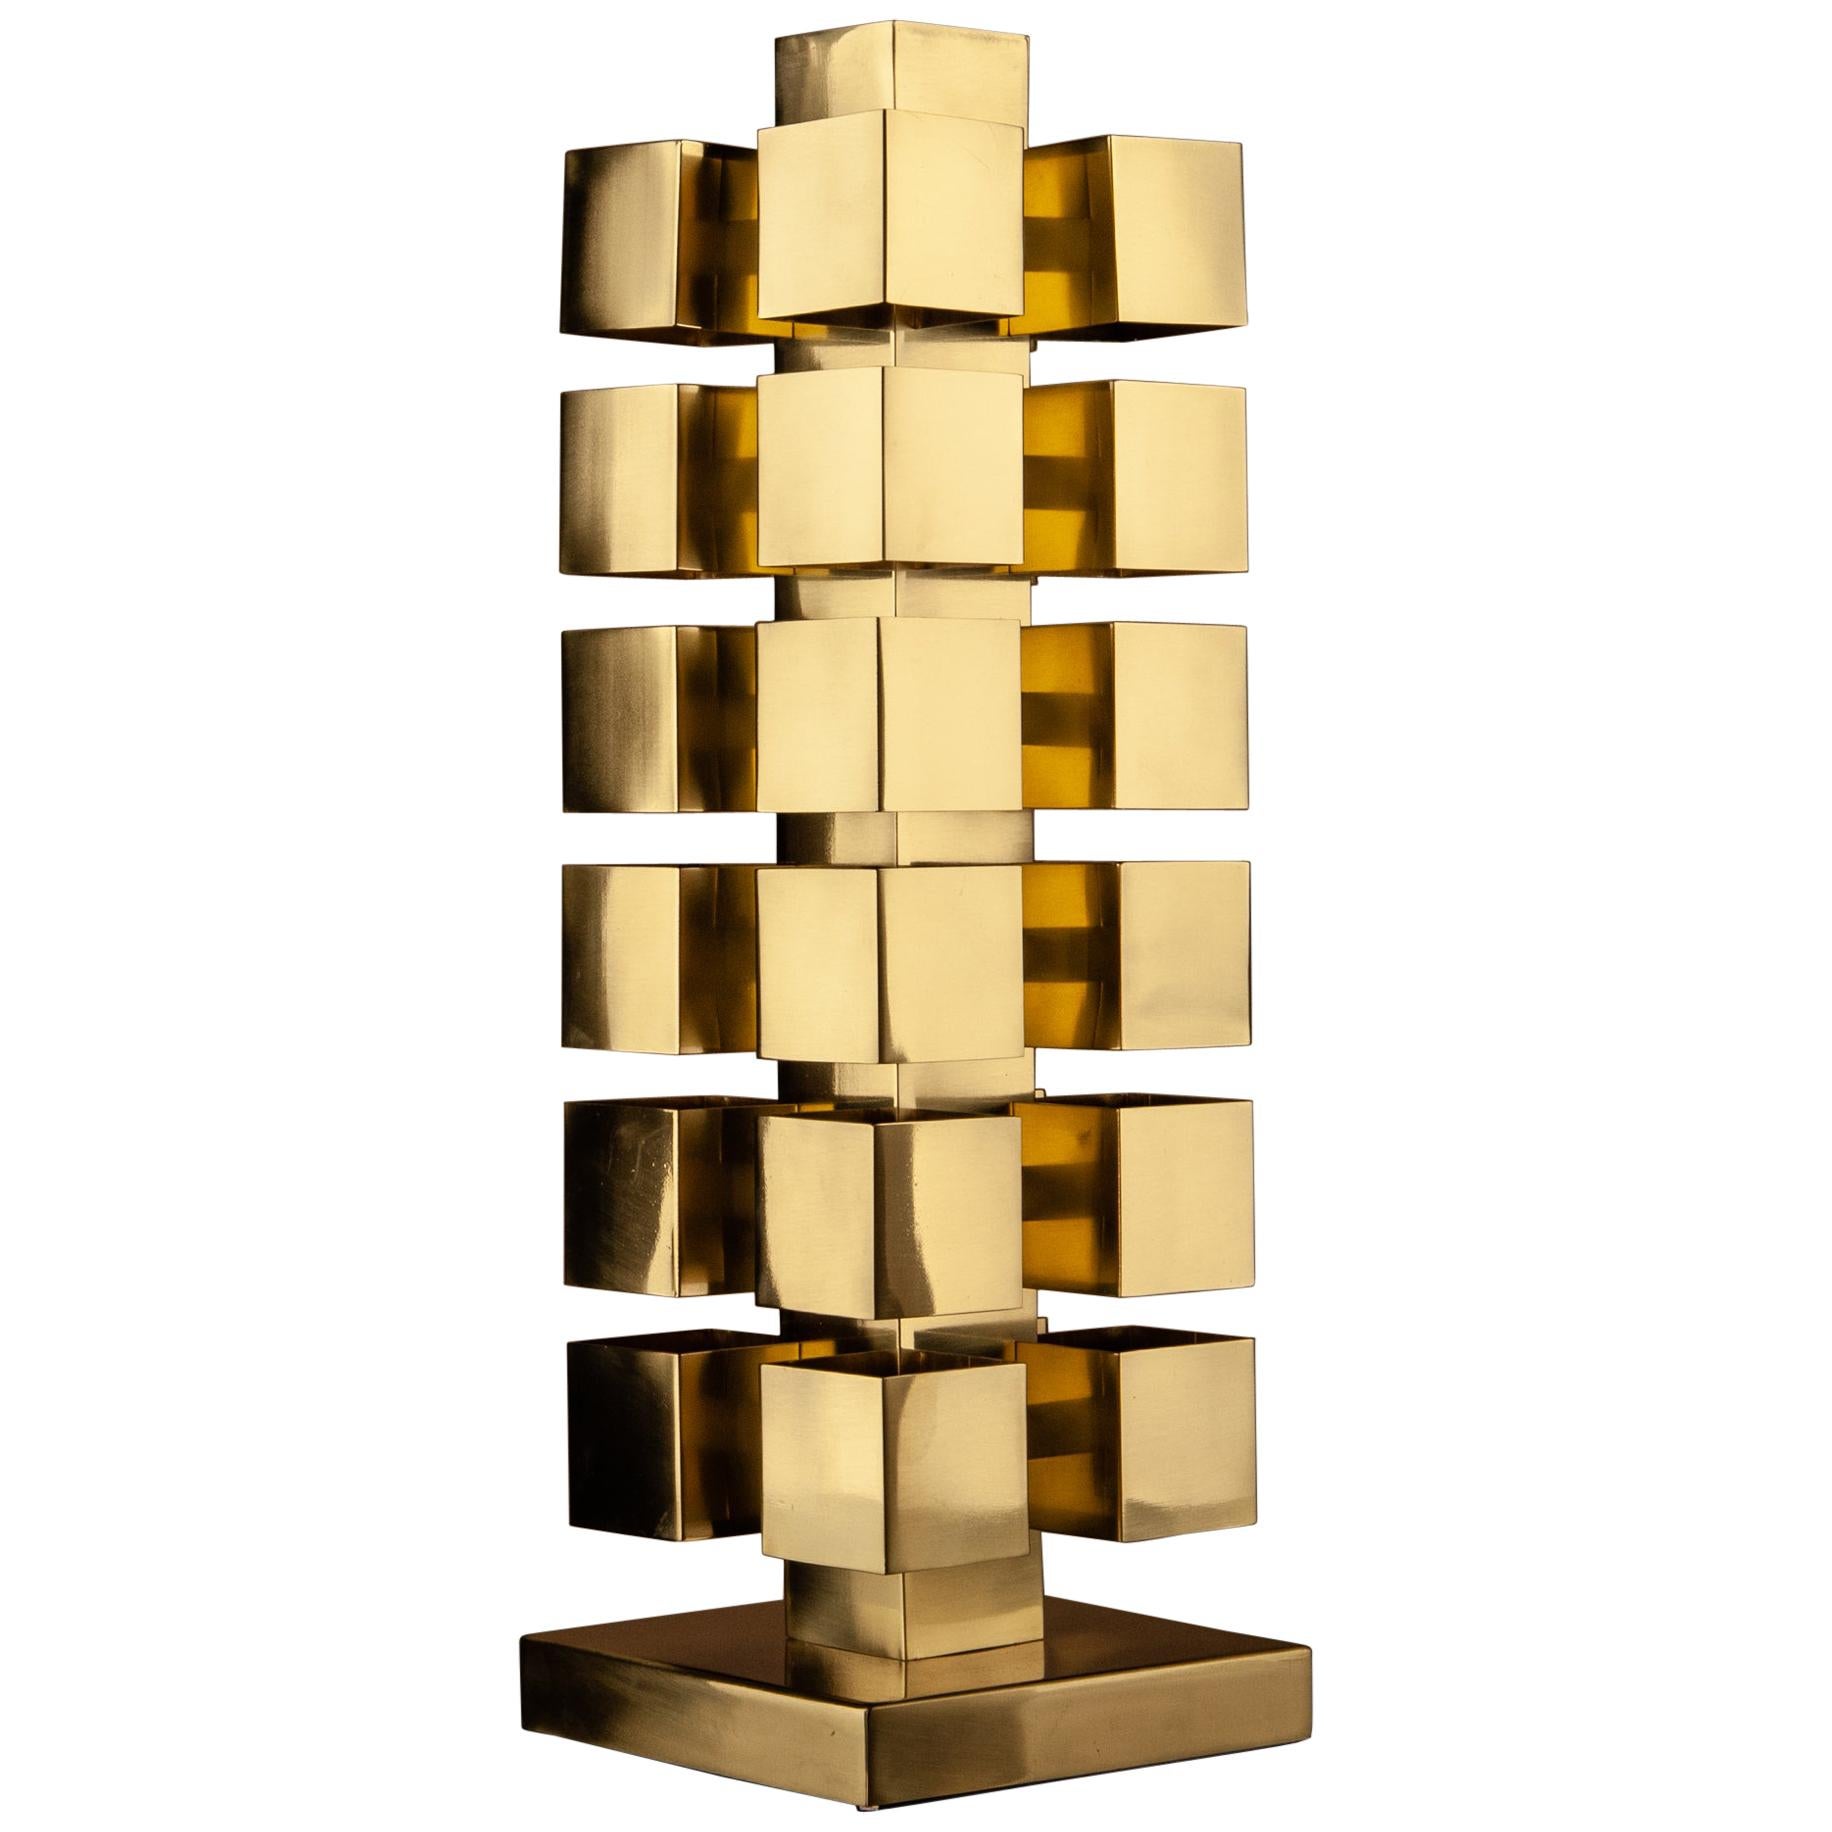 Tetris Sculptural Desk Table Lamp, Solid Brass, Florence Manufacturing For Sale